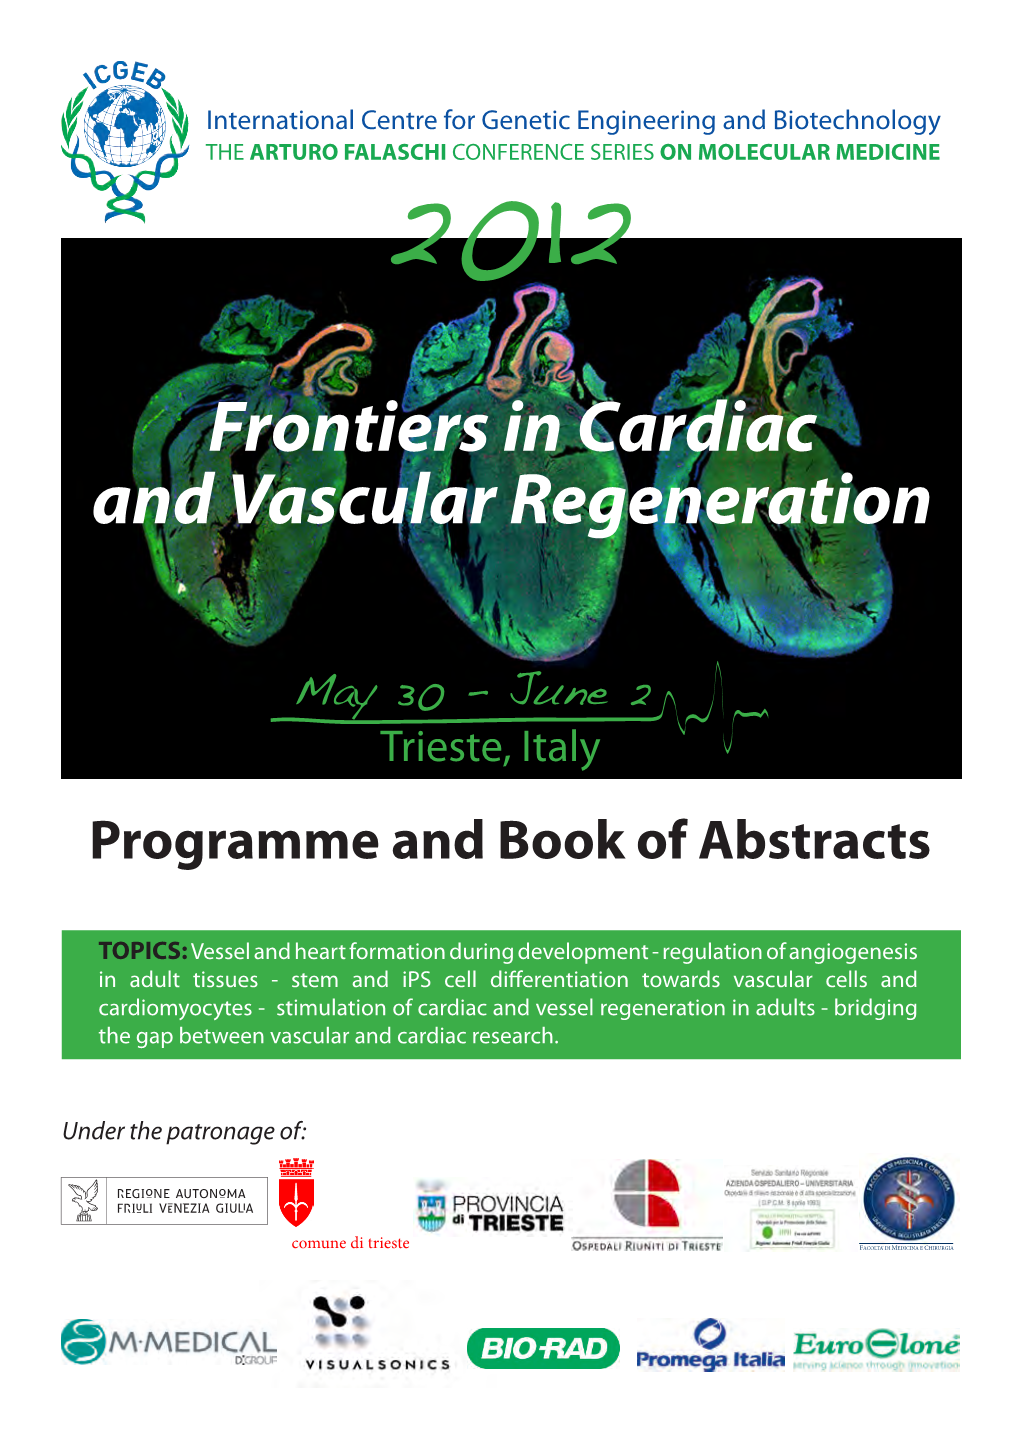 Frontiers in Cardiac and Vascular Regeneration